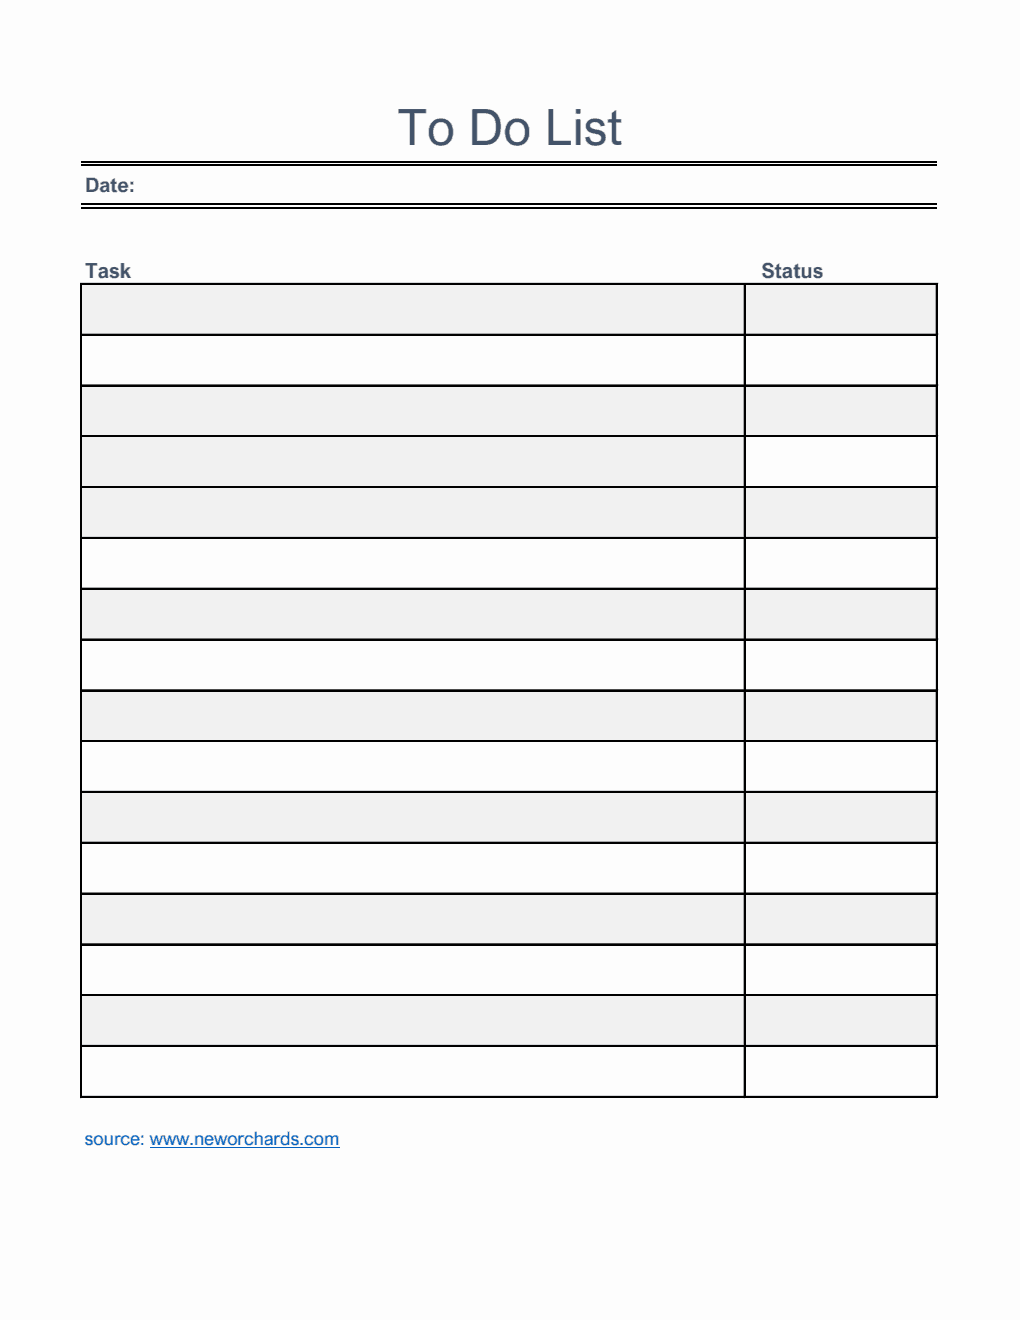 To Do List Template Excel (Striped)